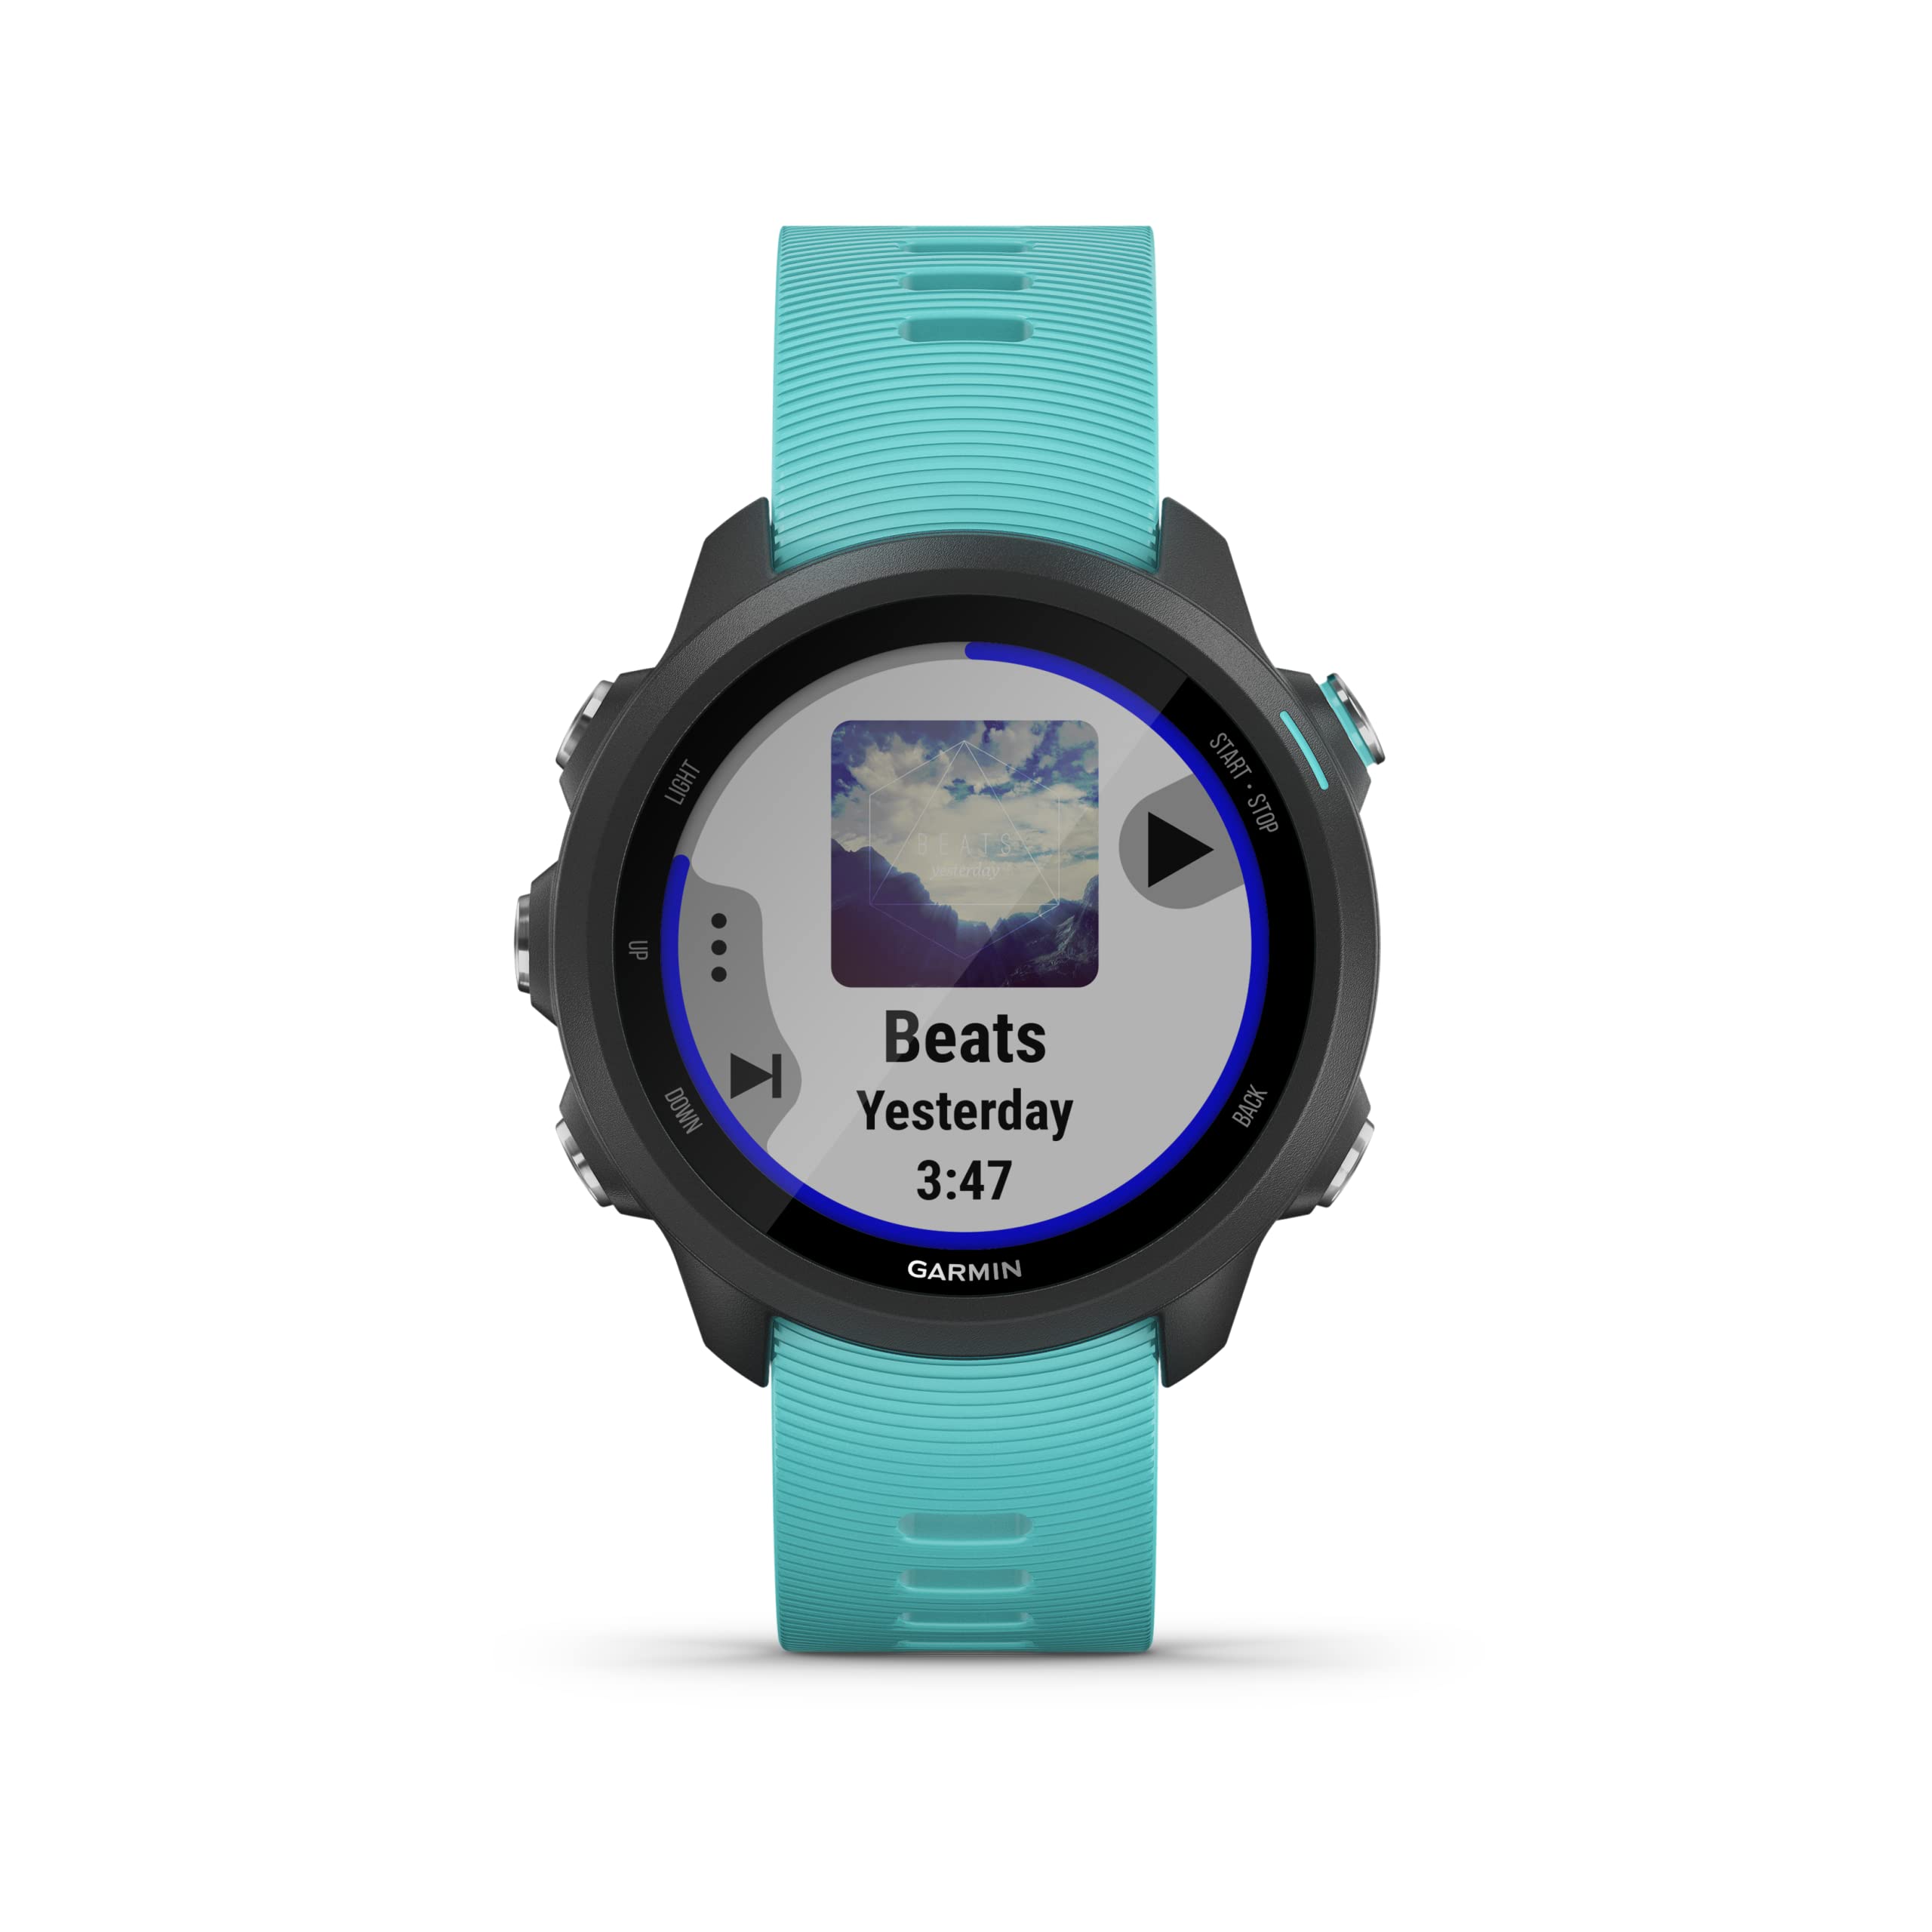 Garmin Forerunner 245 GPS Running Watch, with music and advanced training features, Black with Aqua Band